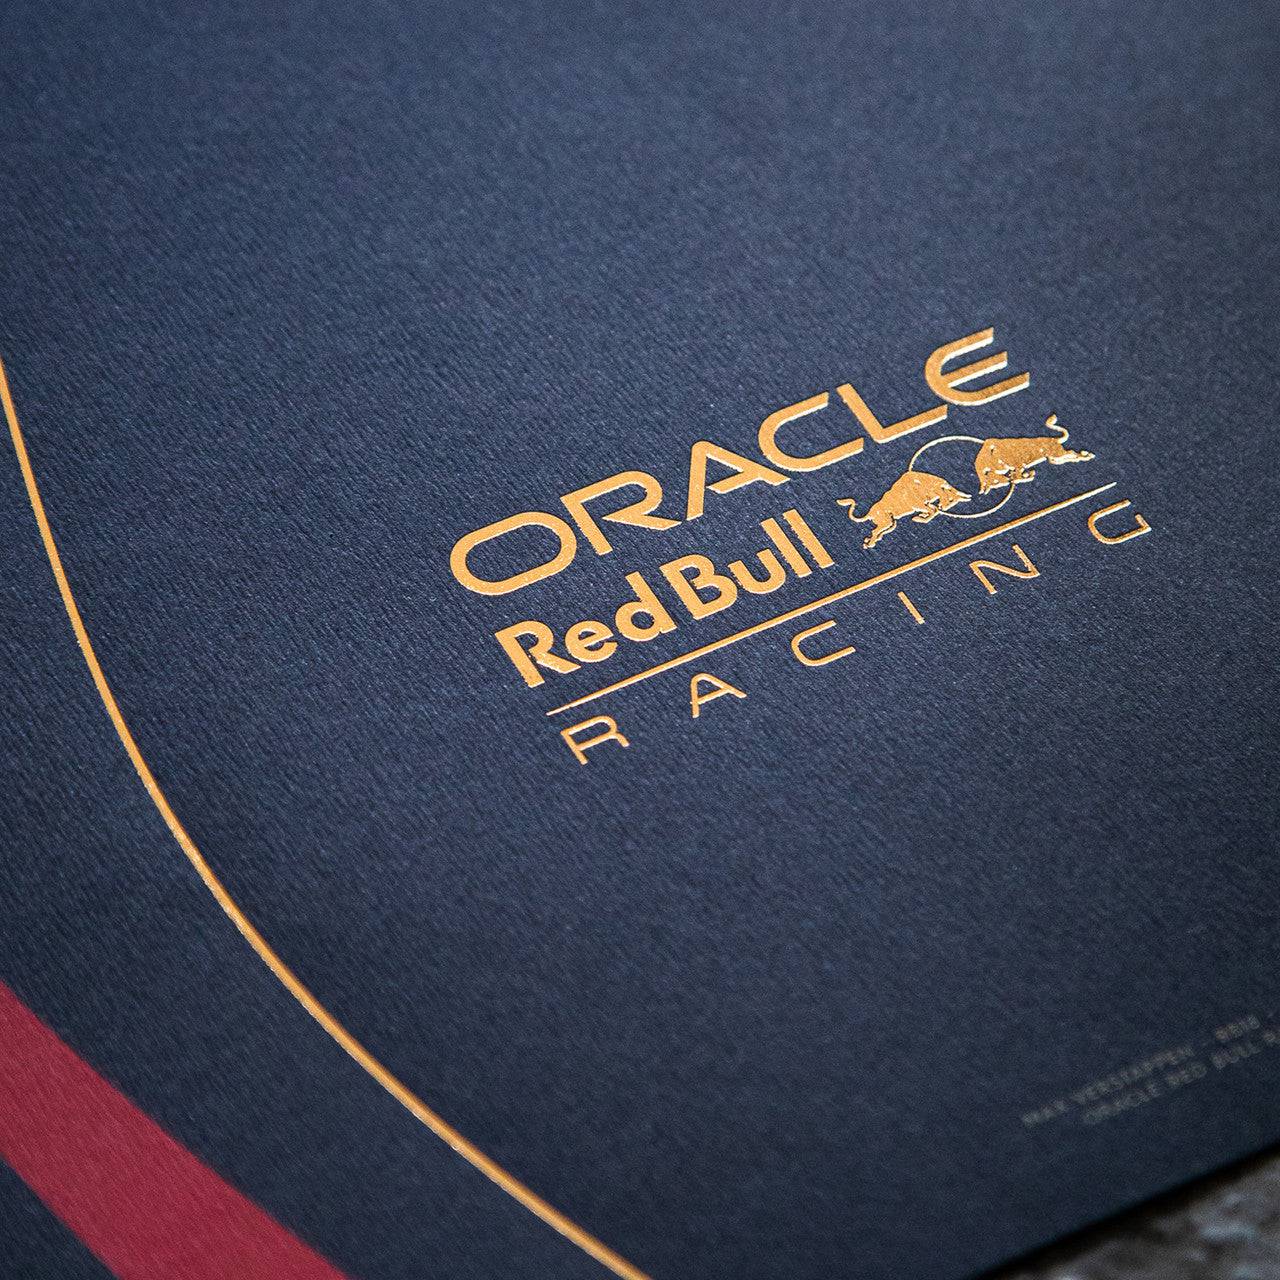 Oracle Red Bull Racing - Max Verstappen - 2022 | Collector's Edition - Automobilist